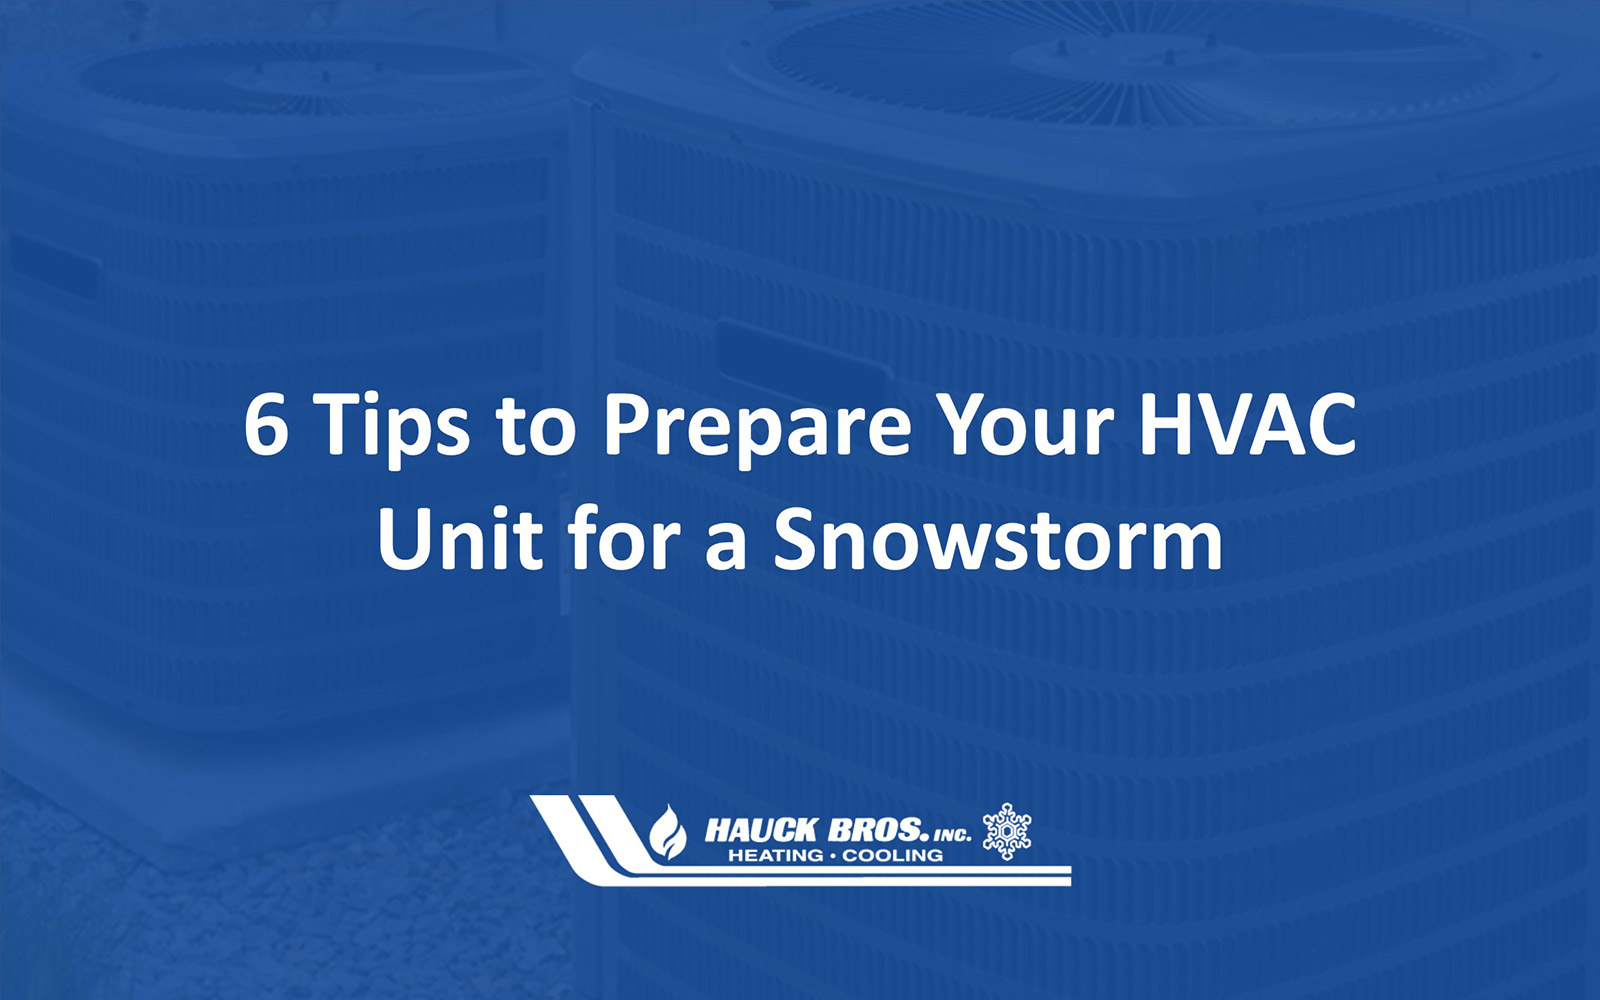 6 Tips to Prepare Your HVAC Unit for a Snowstorm - Hauck Bros